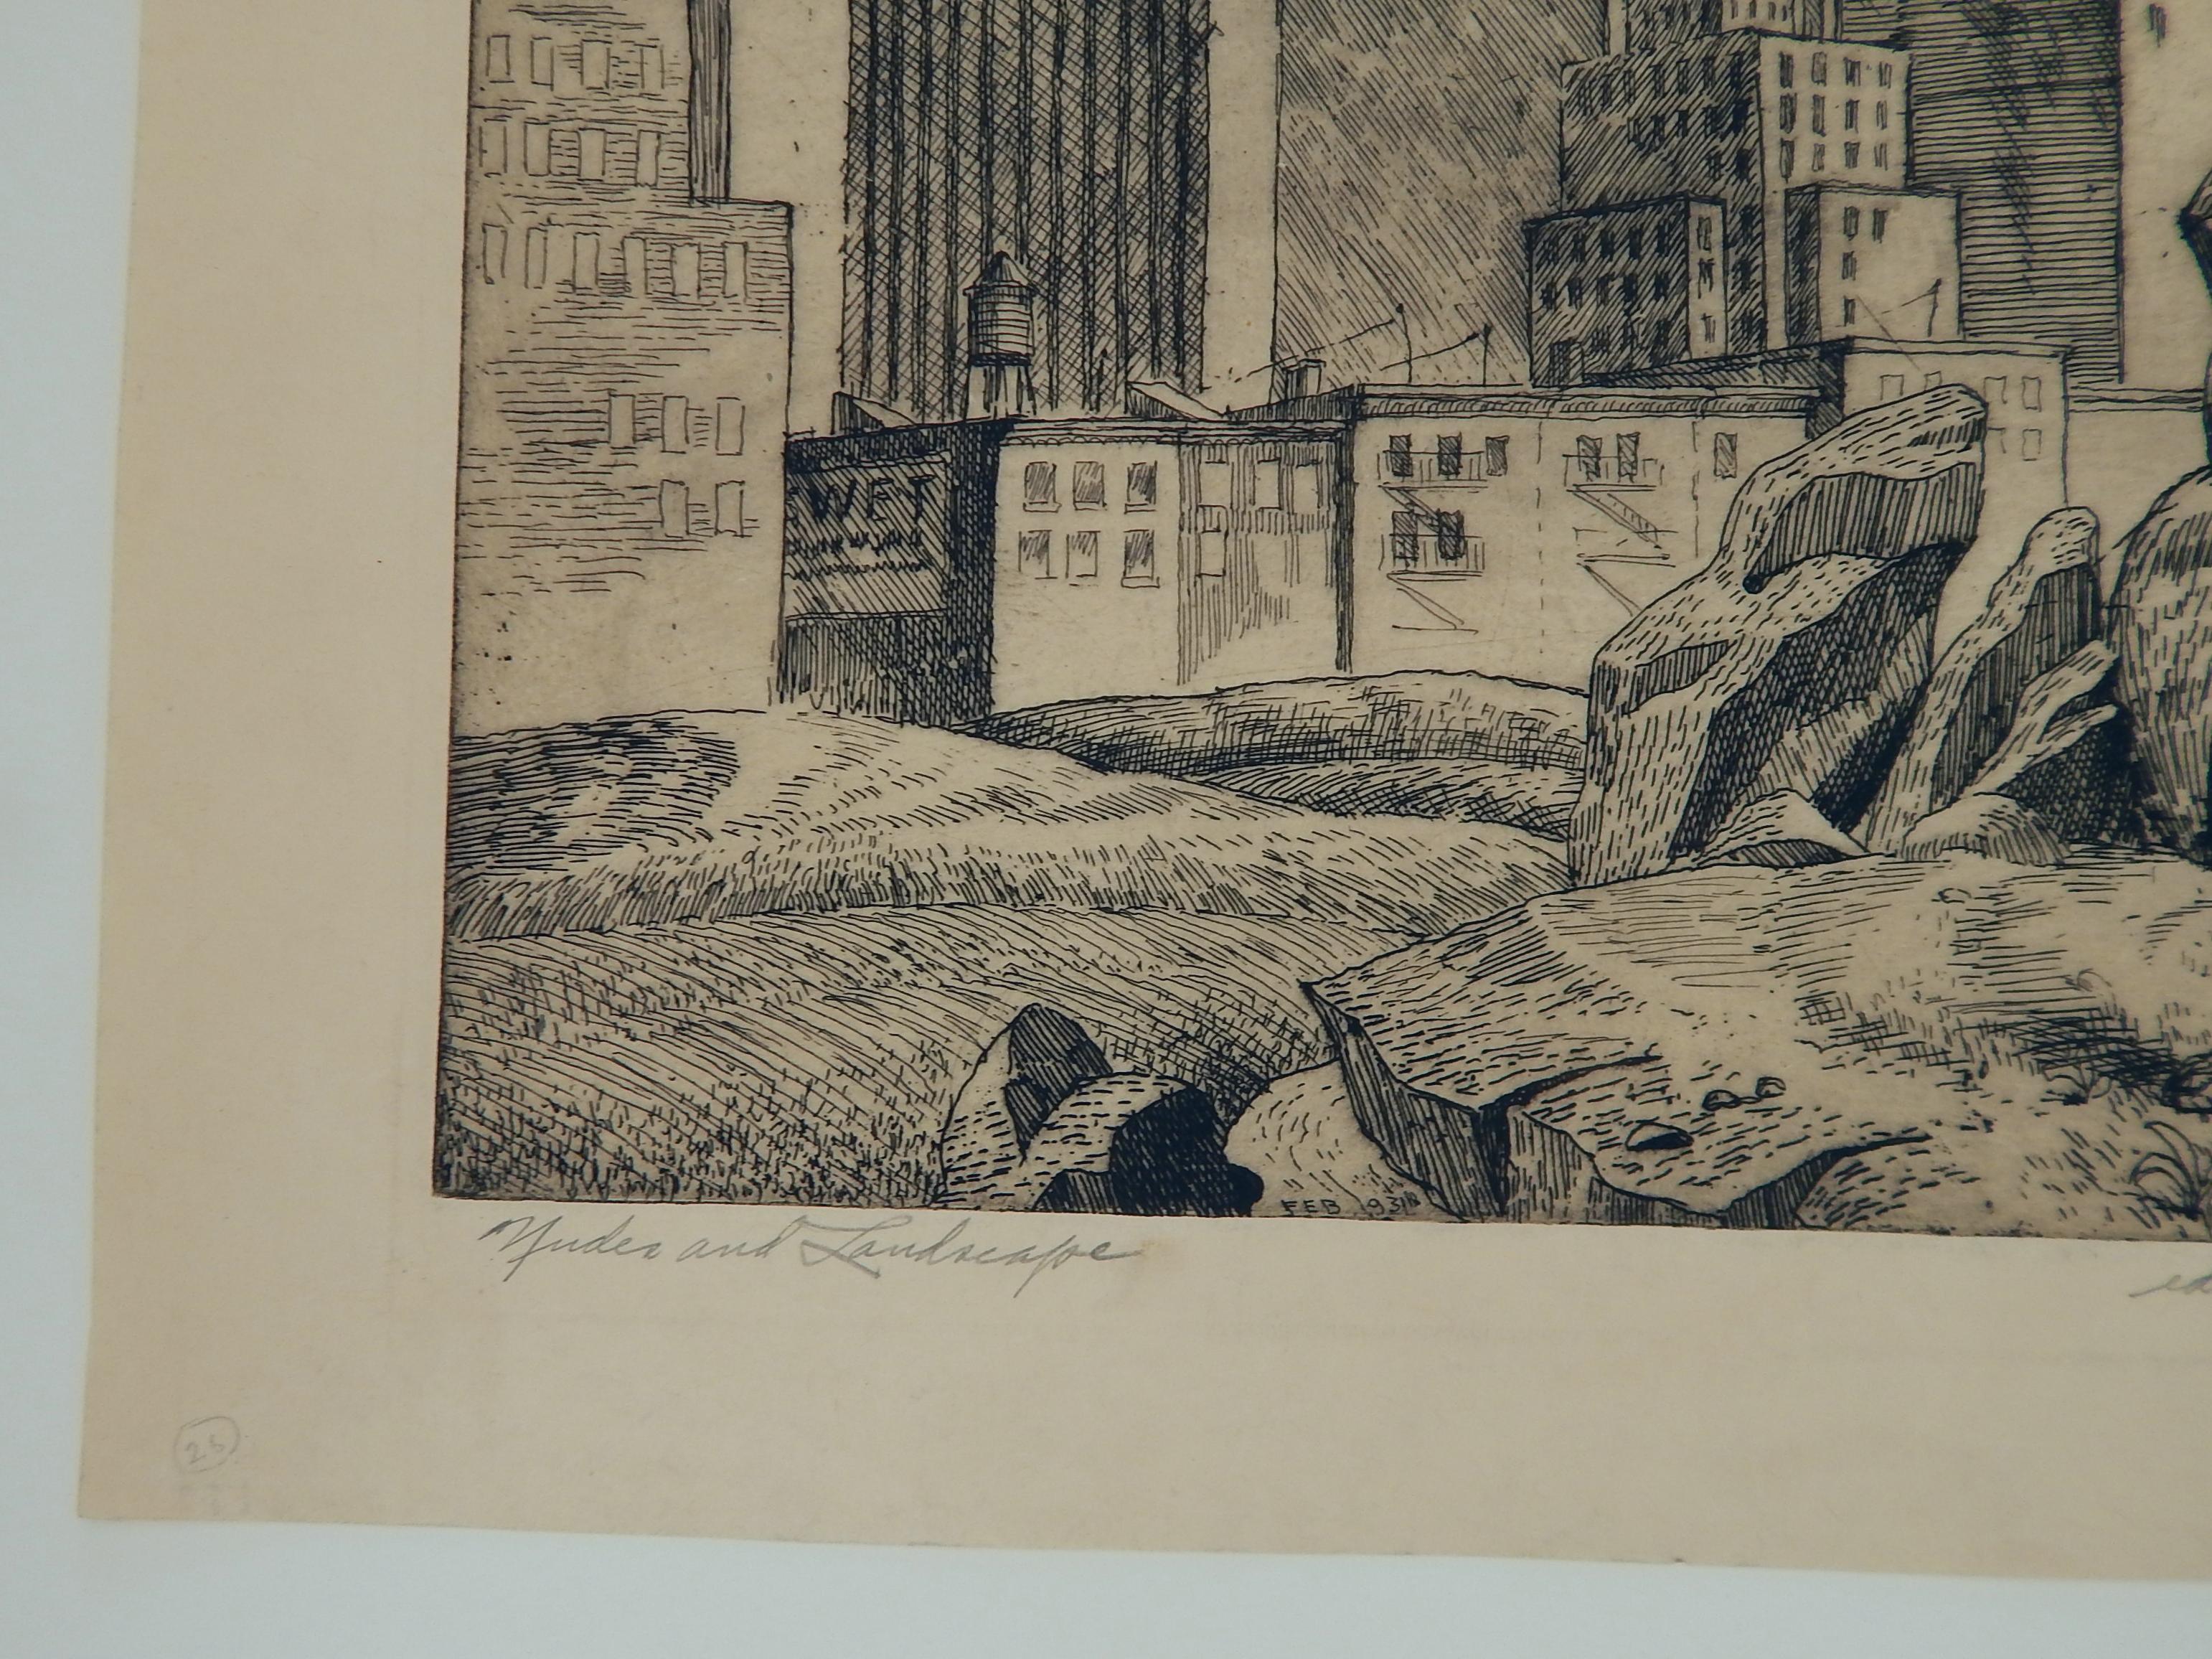 Paper Harry Sternberg Pencil Signed Etching, 1931, New York City “Nudes in Landscape